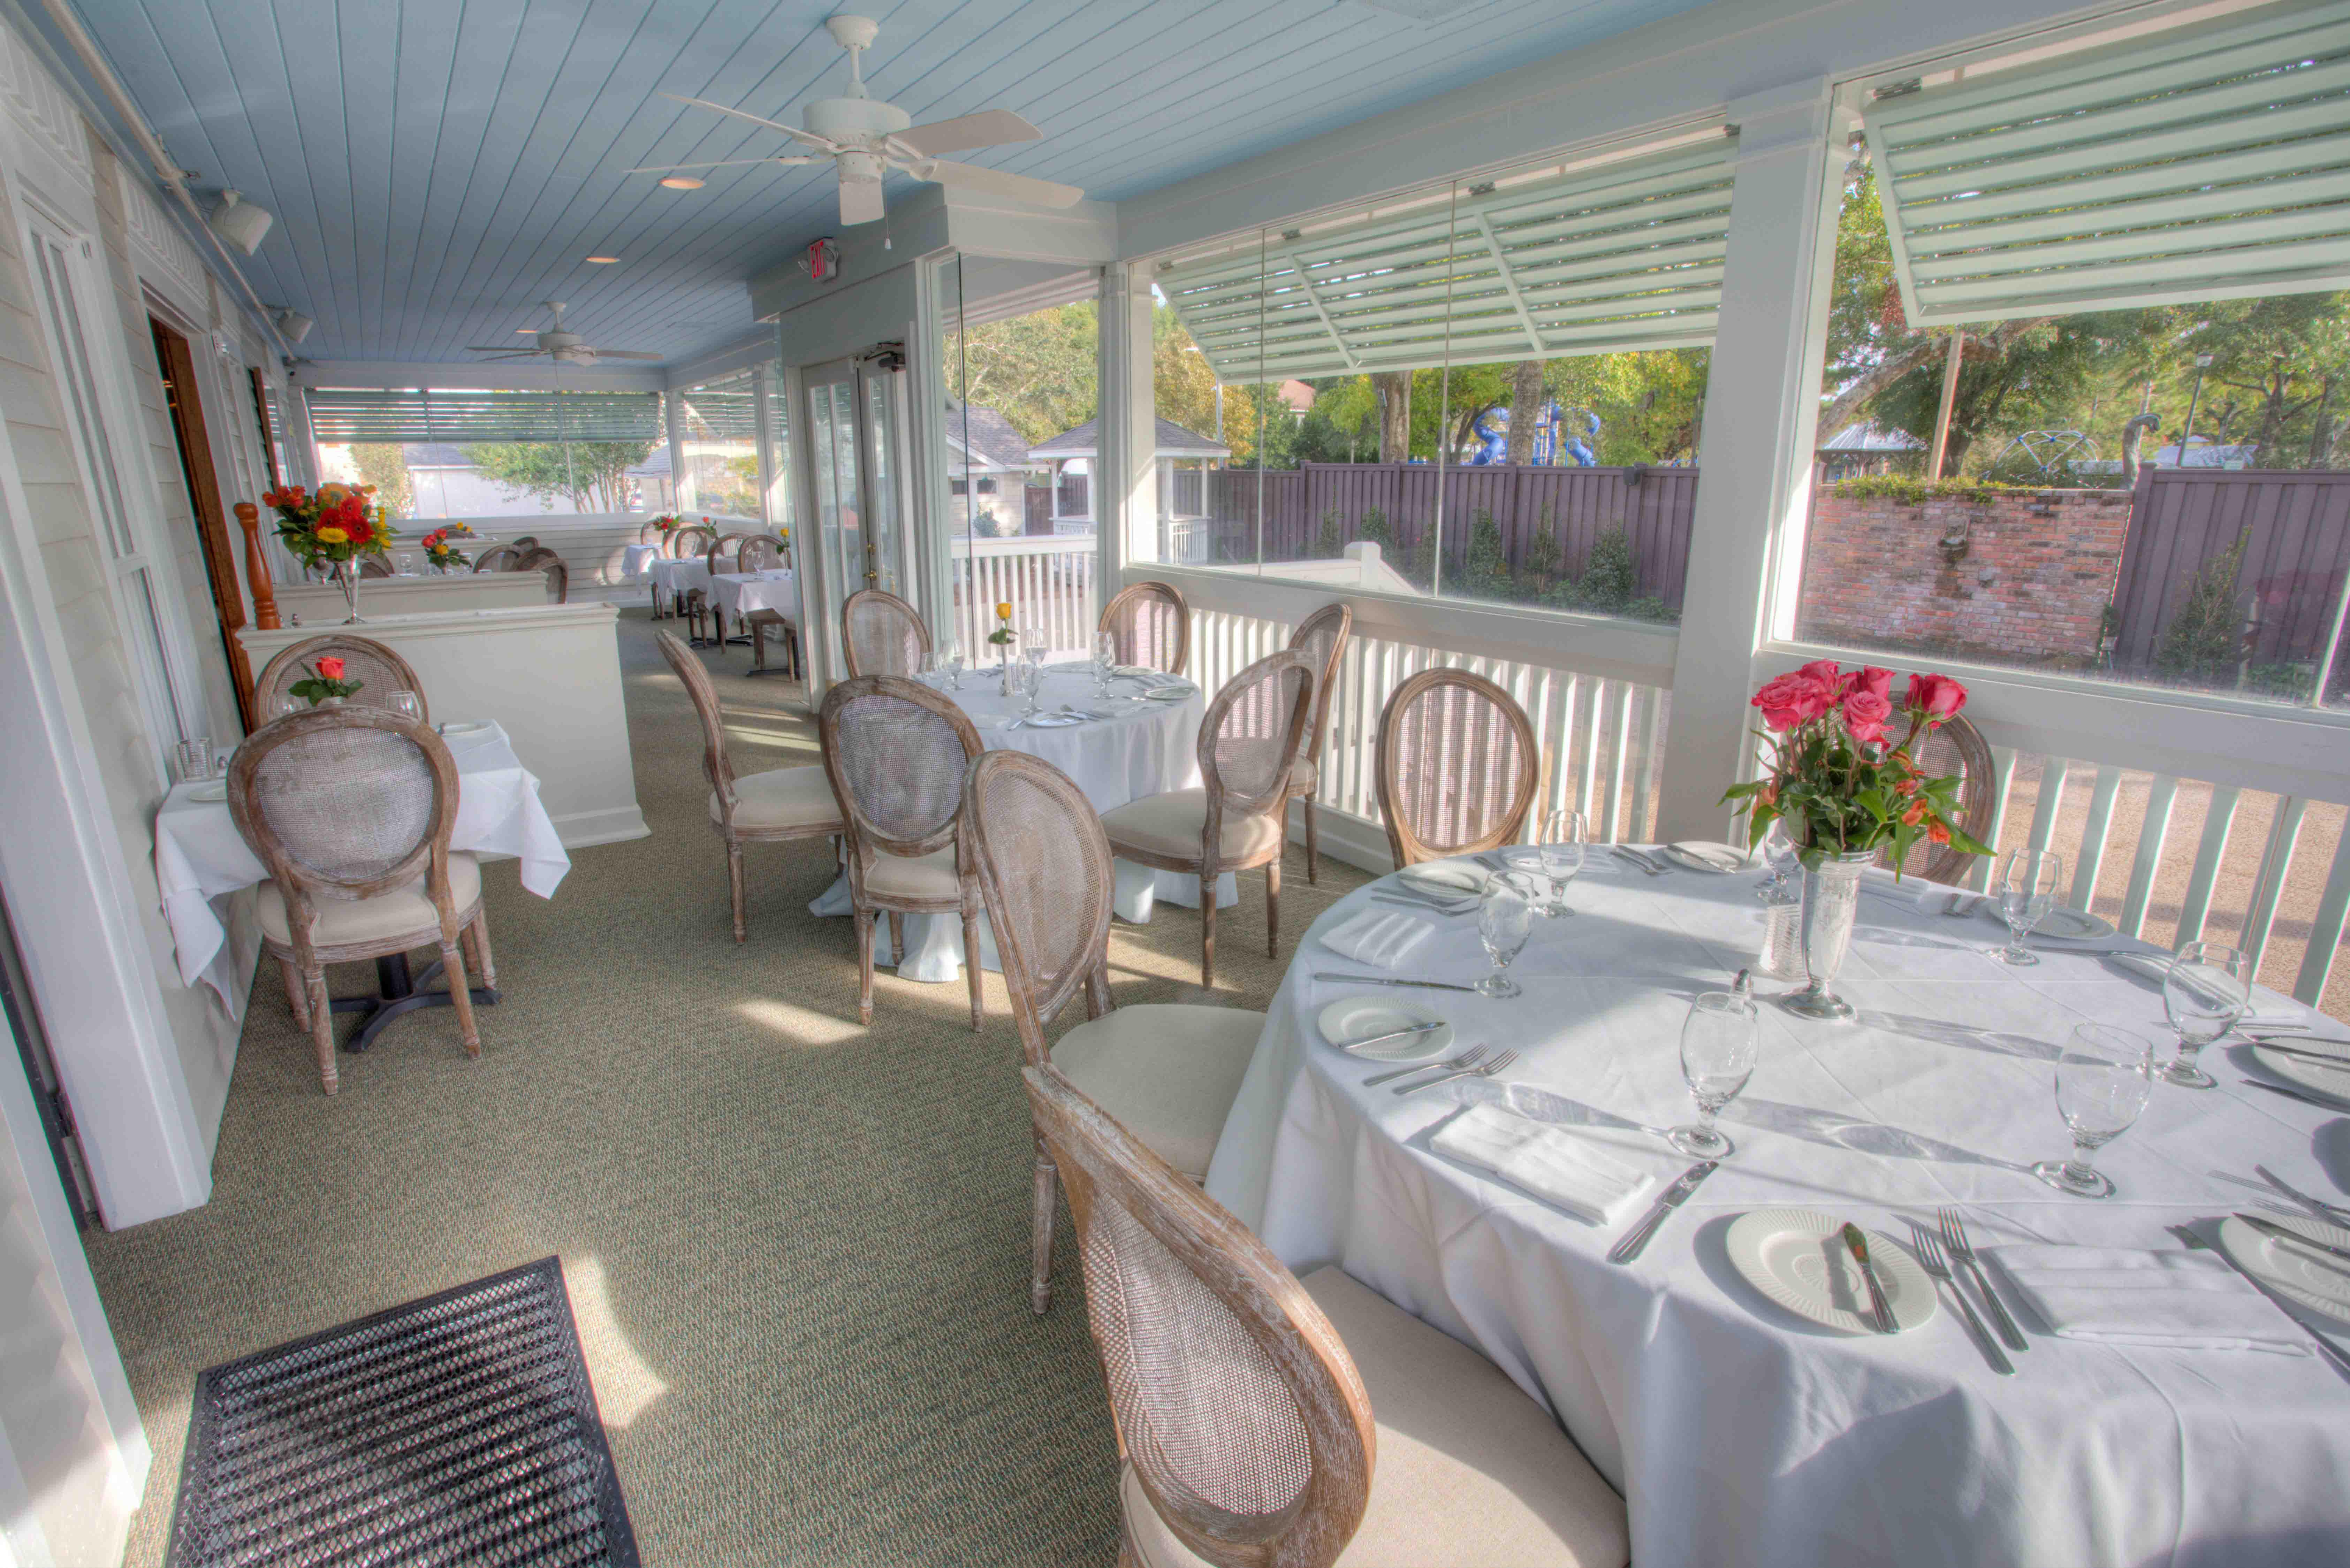 Side porch dining area overlooking courtyard - The Fairhope Inn Restaurant and B&B
Historic Downtown Fairhope Alabama